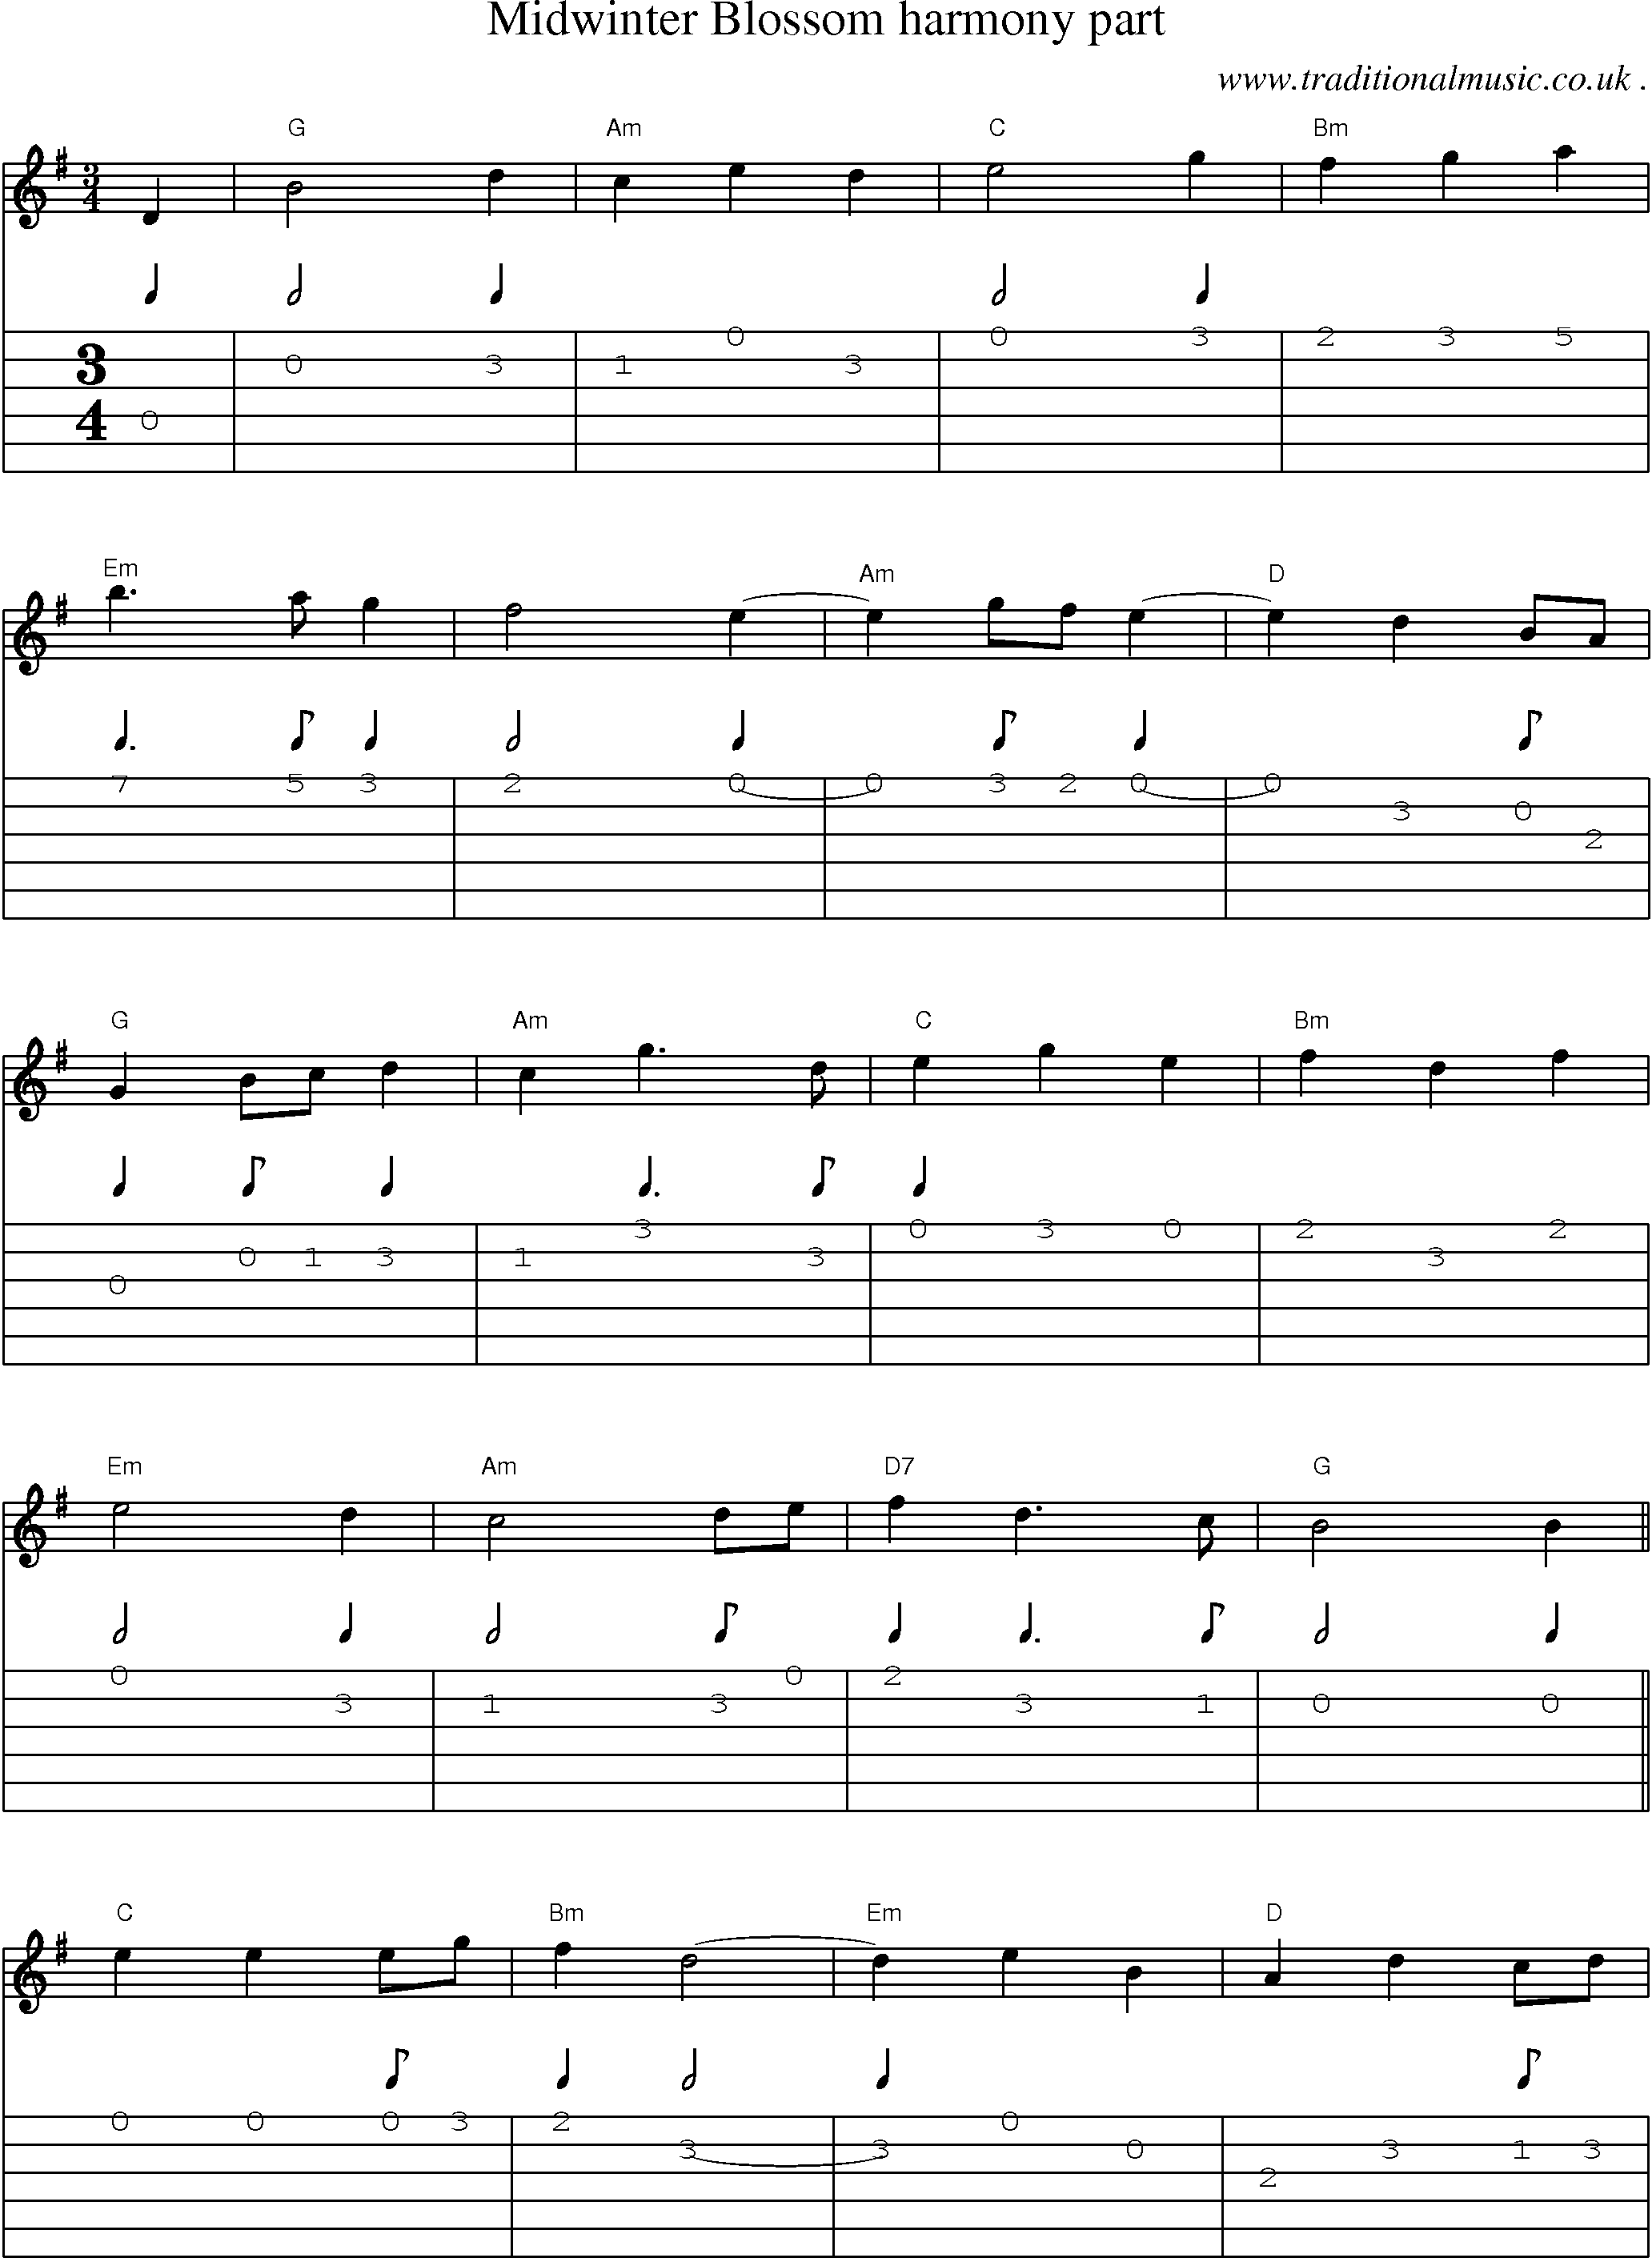 Music Score and Guitar Tabs for Midwinter Blossom Harmony Part